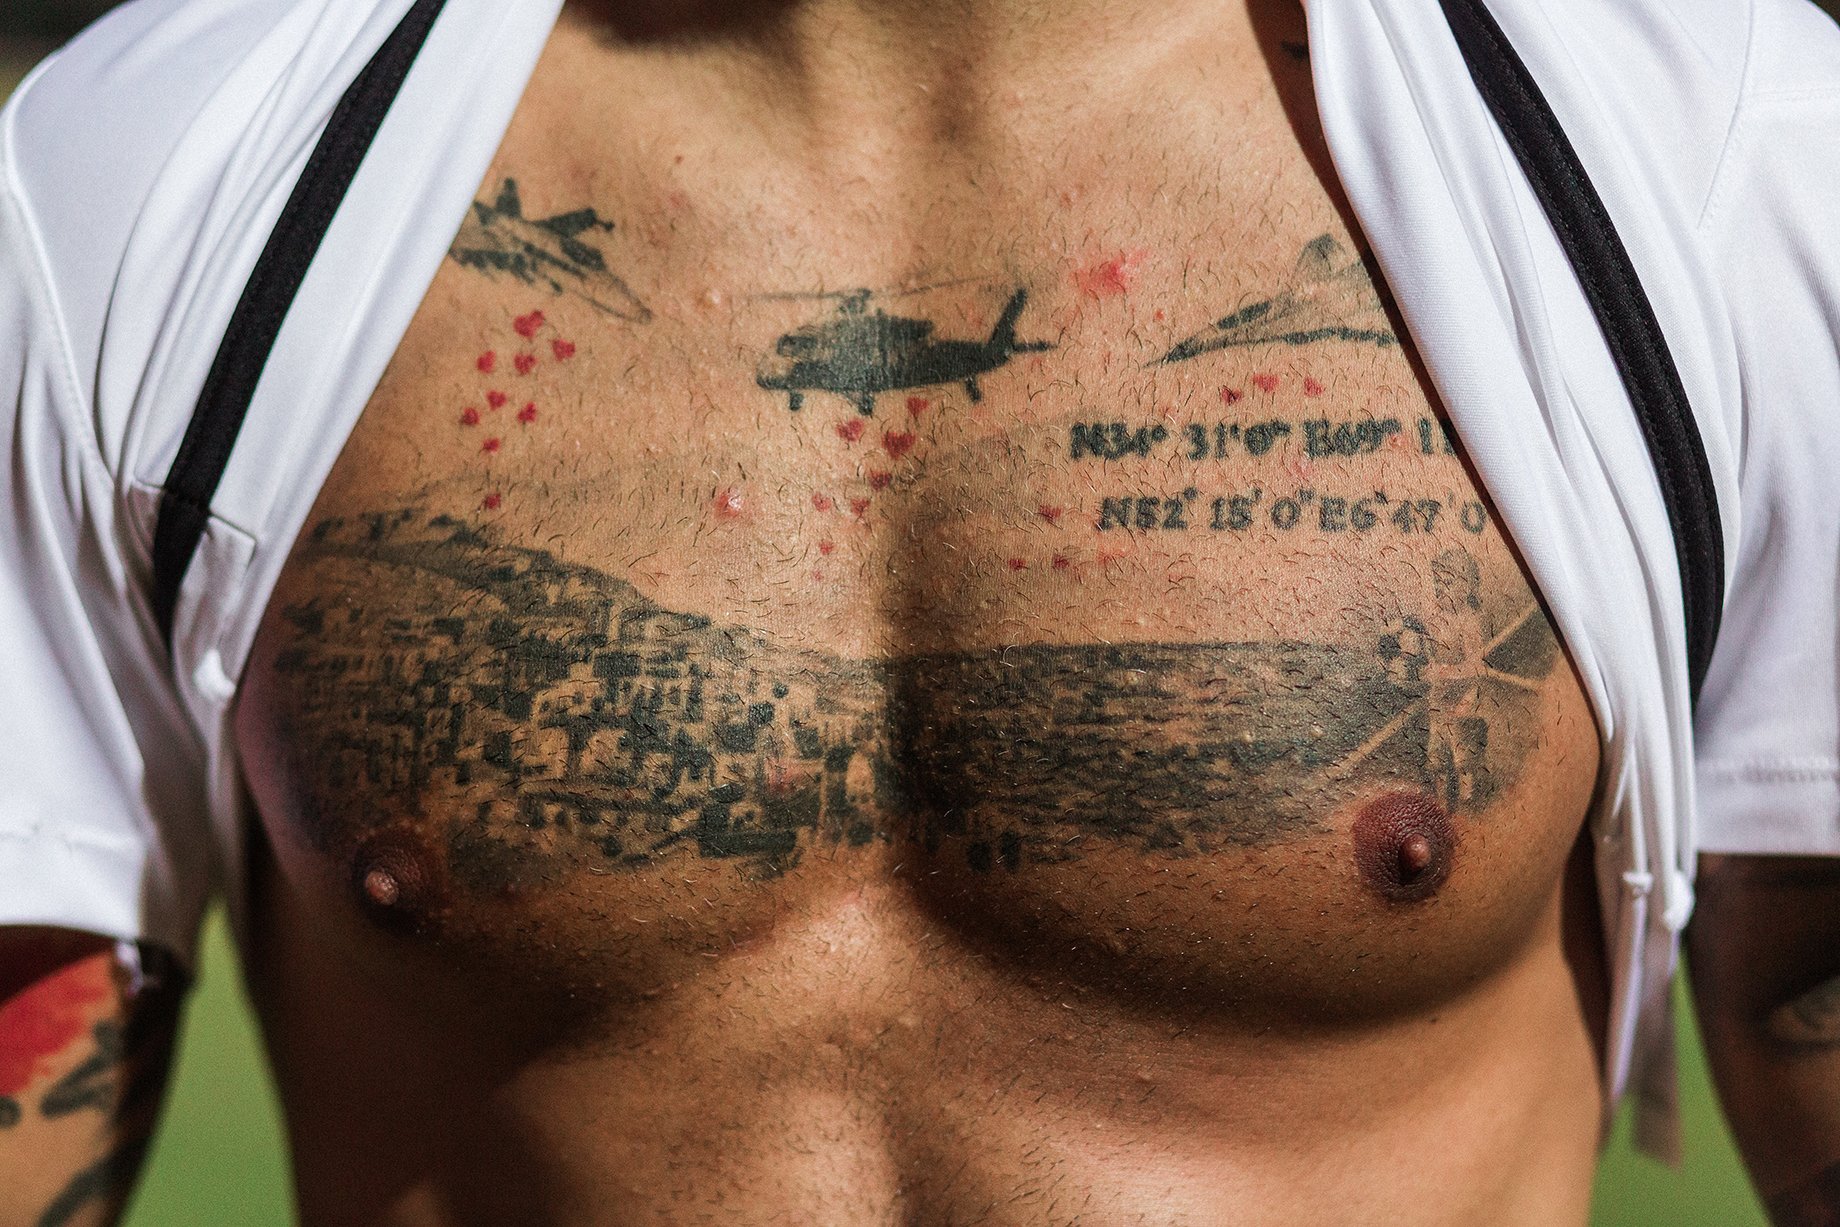 Faysal Sheyesteh of the Afghanistan National Soccer team, shows some of his tattoos, which all have a personal significance. On his chest he has a scene where war planes drop hearts onto Afghanistan, with the coordinates of a location near Kabul, and one in the Netherlands, where he grew up. Shot by Bradley Secker for the New York Times.